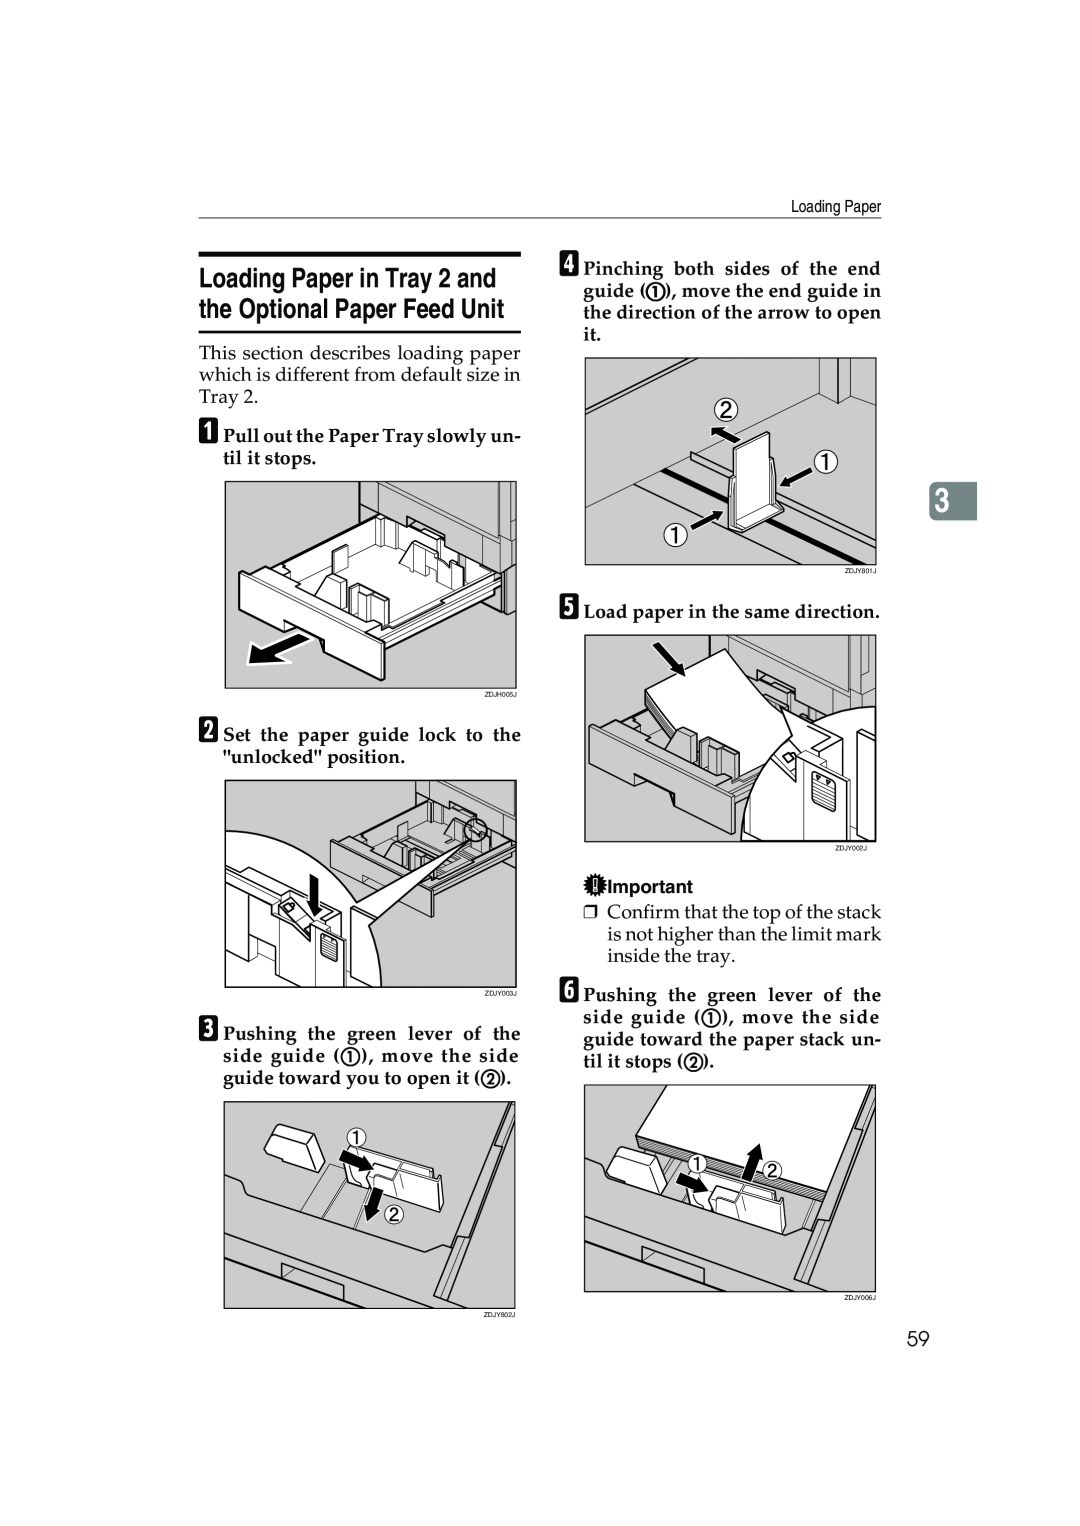 Ricoh AP3800C operating instructions A Pull out the Paper Tray slowly un- til it stops 